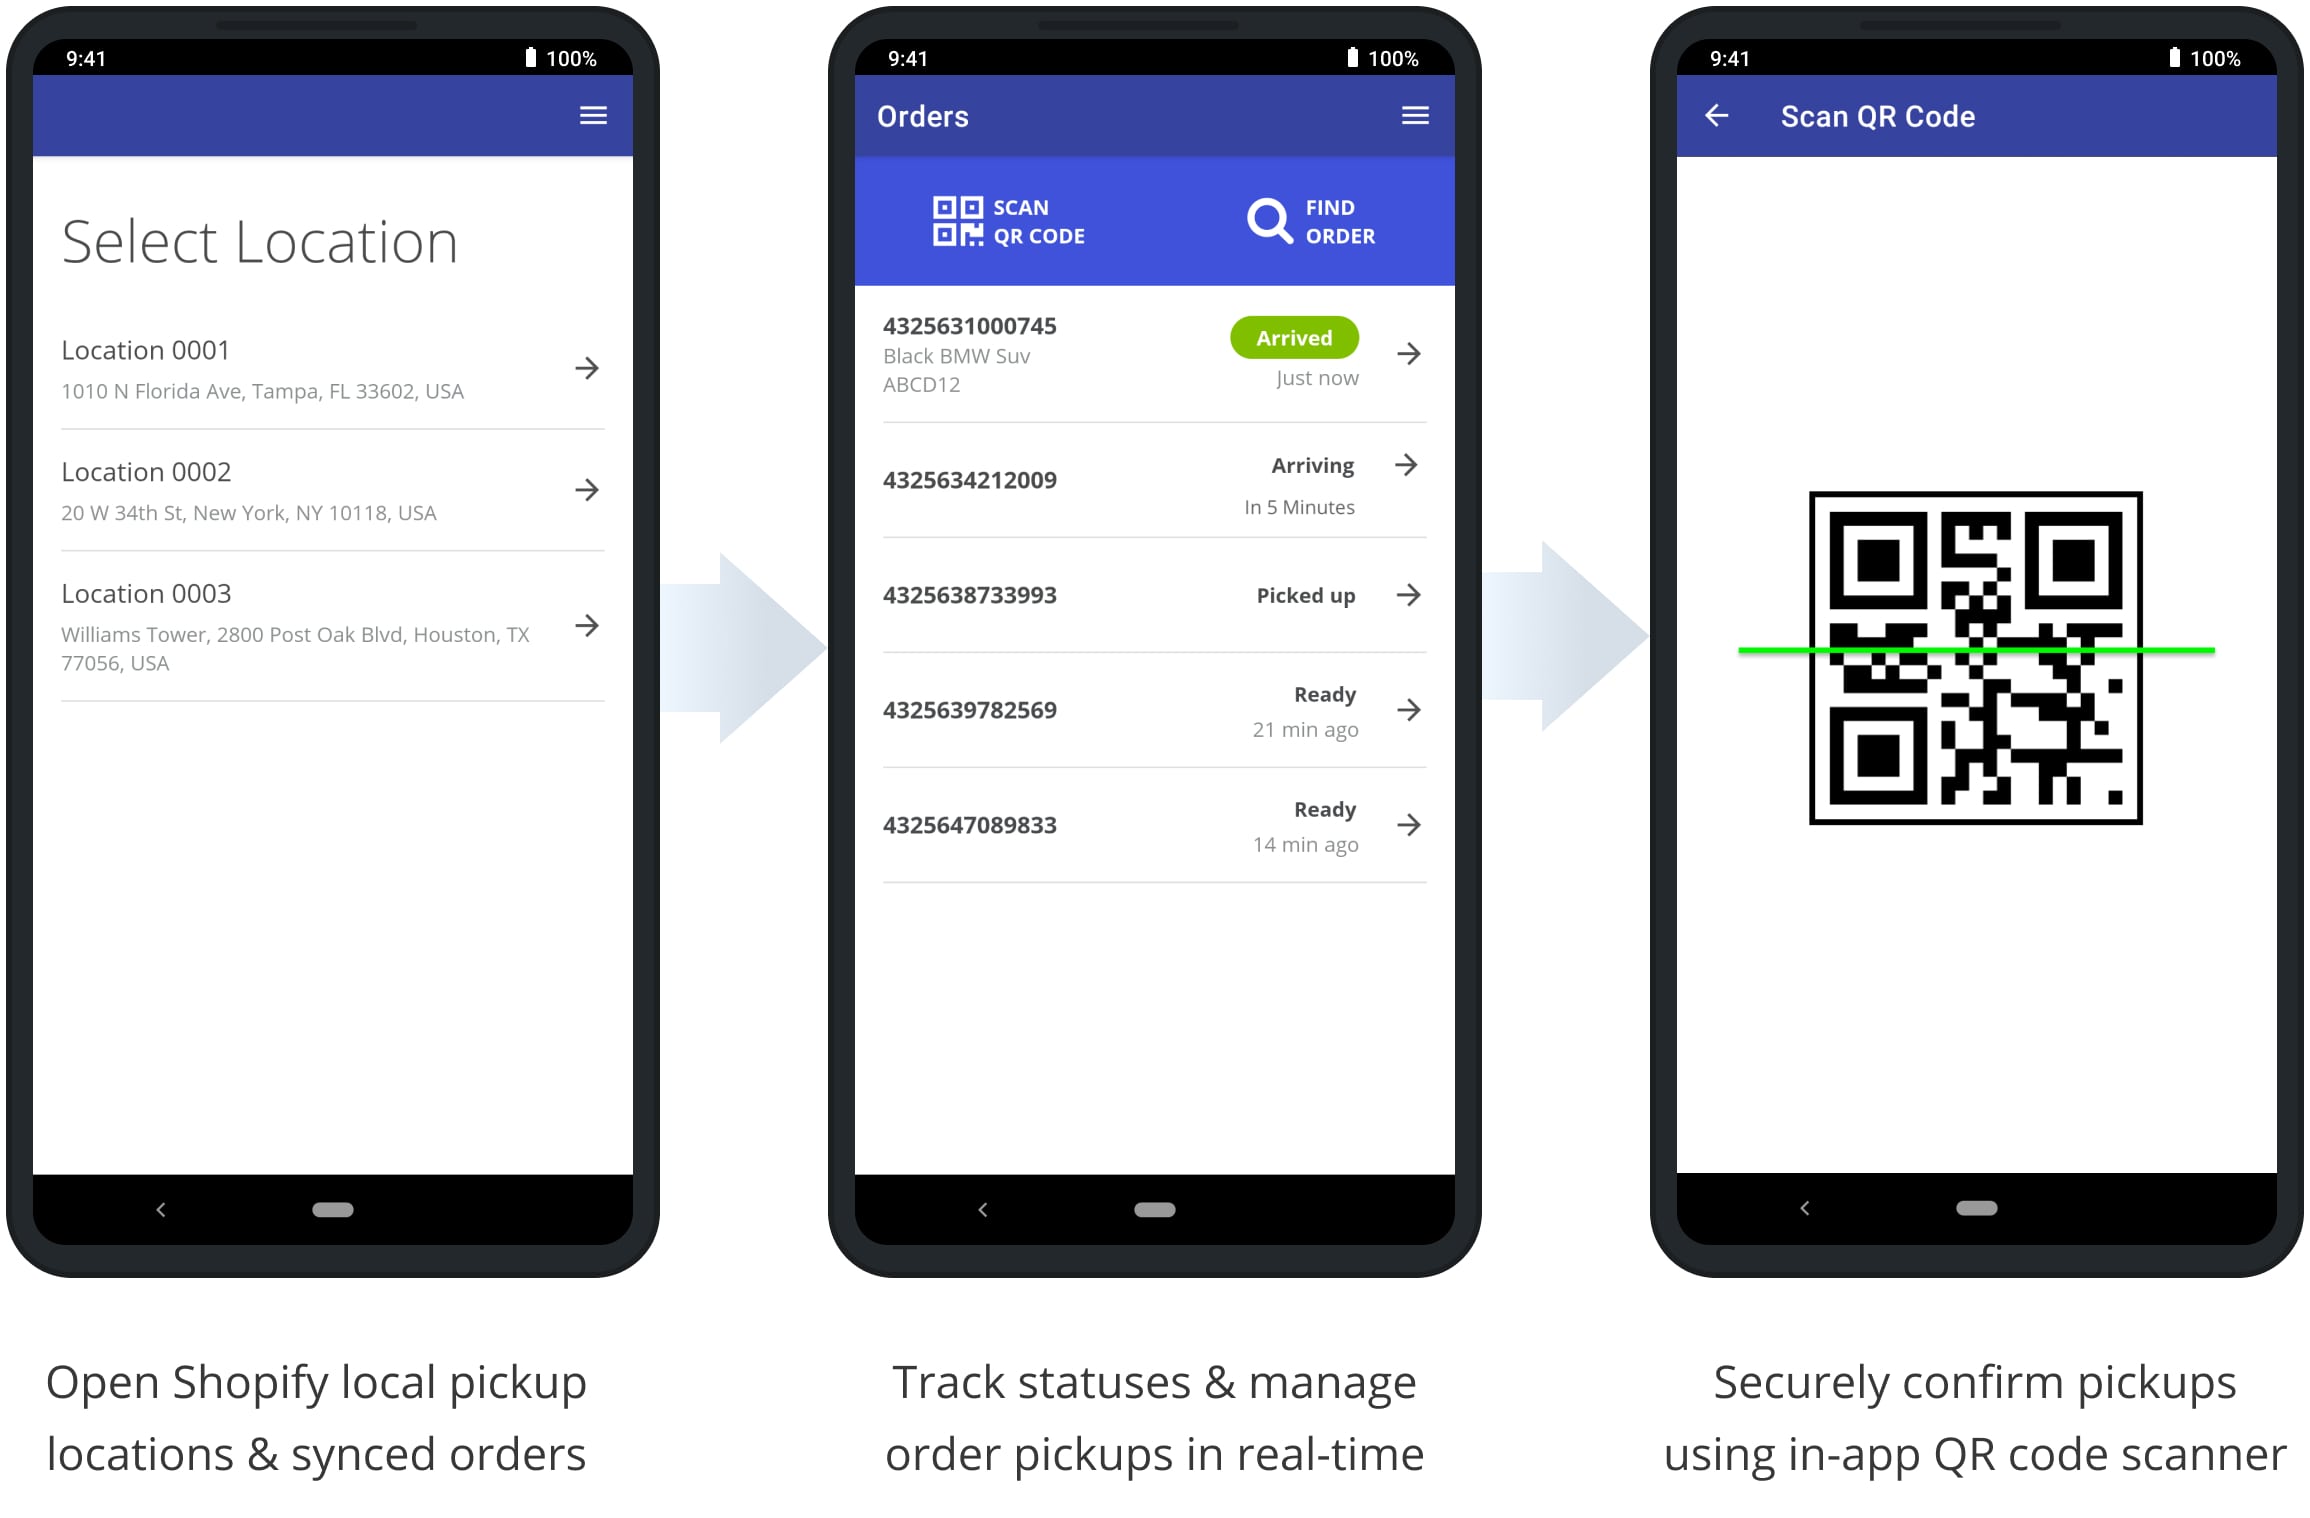 Shopify store local pickup location managers can use Mobile Curbside Pickup app to open store locations and manage synced orders.